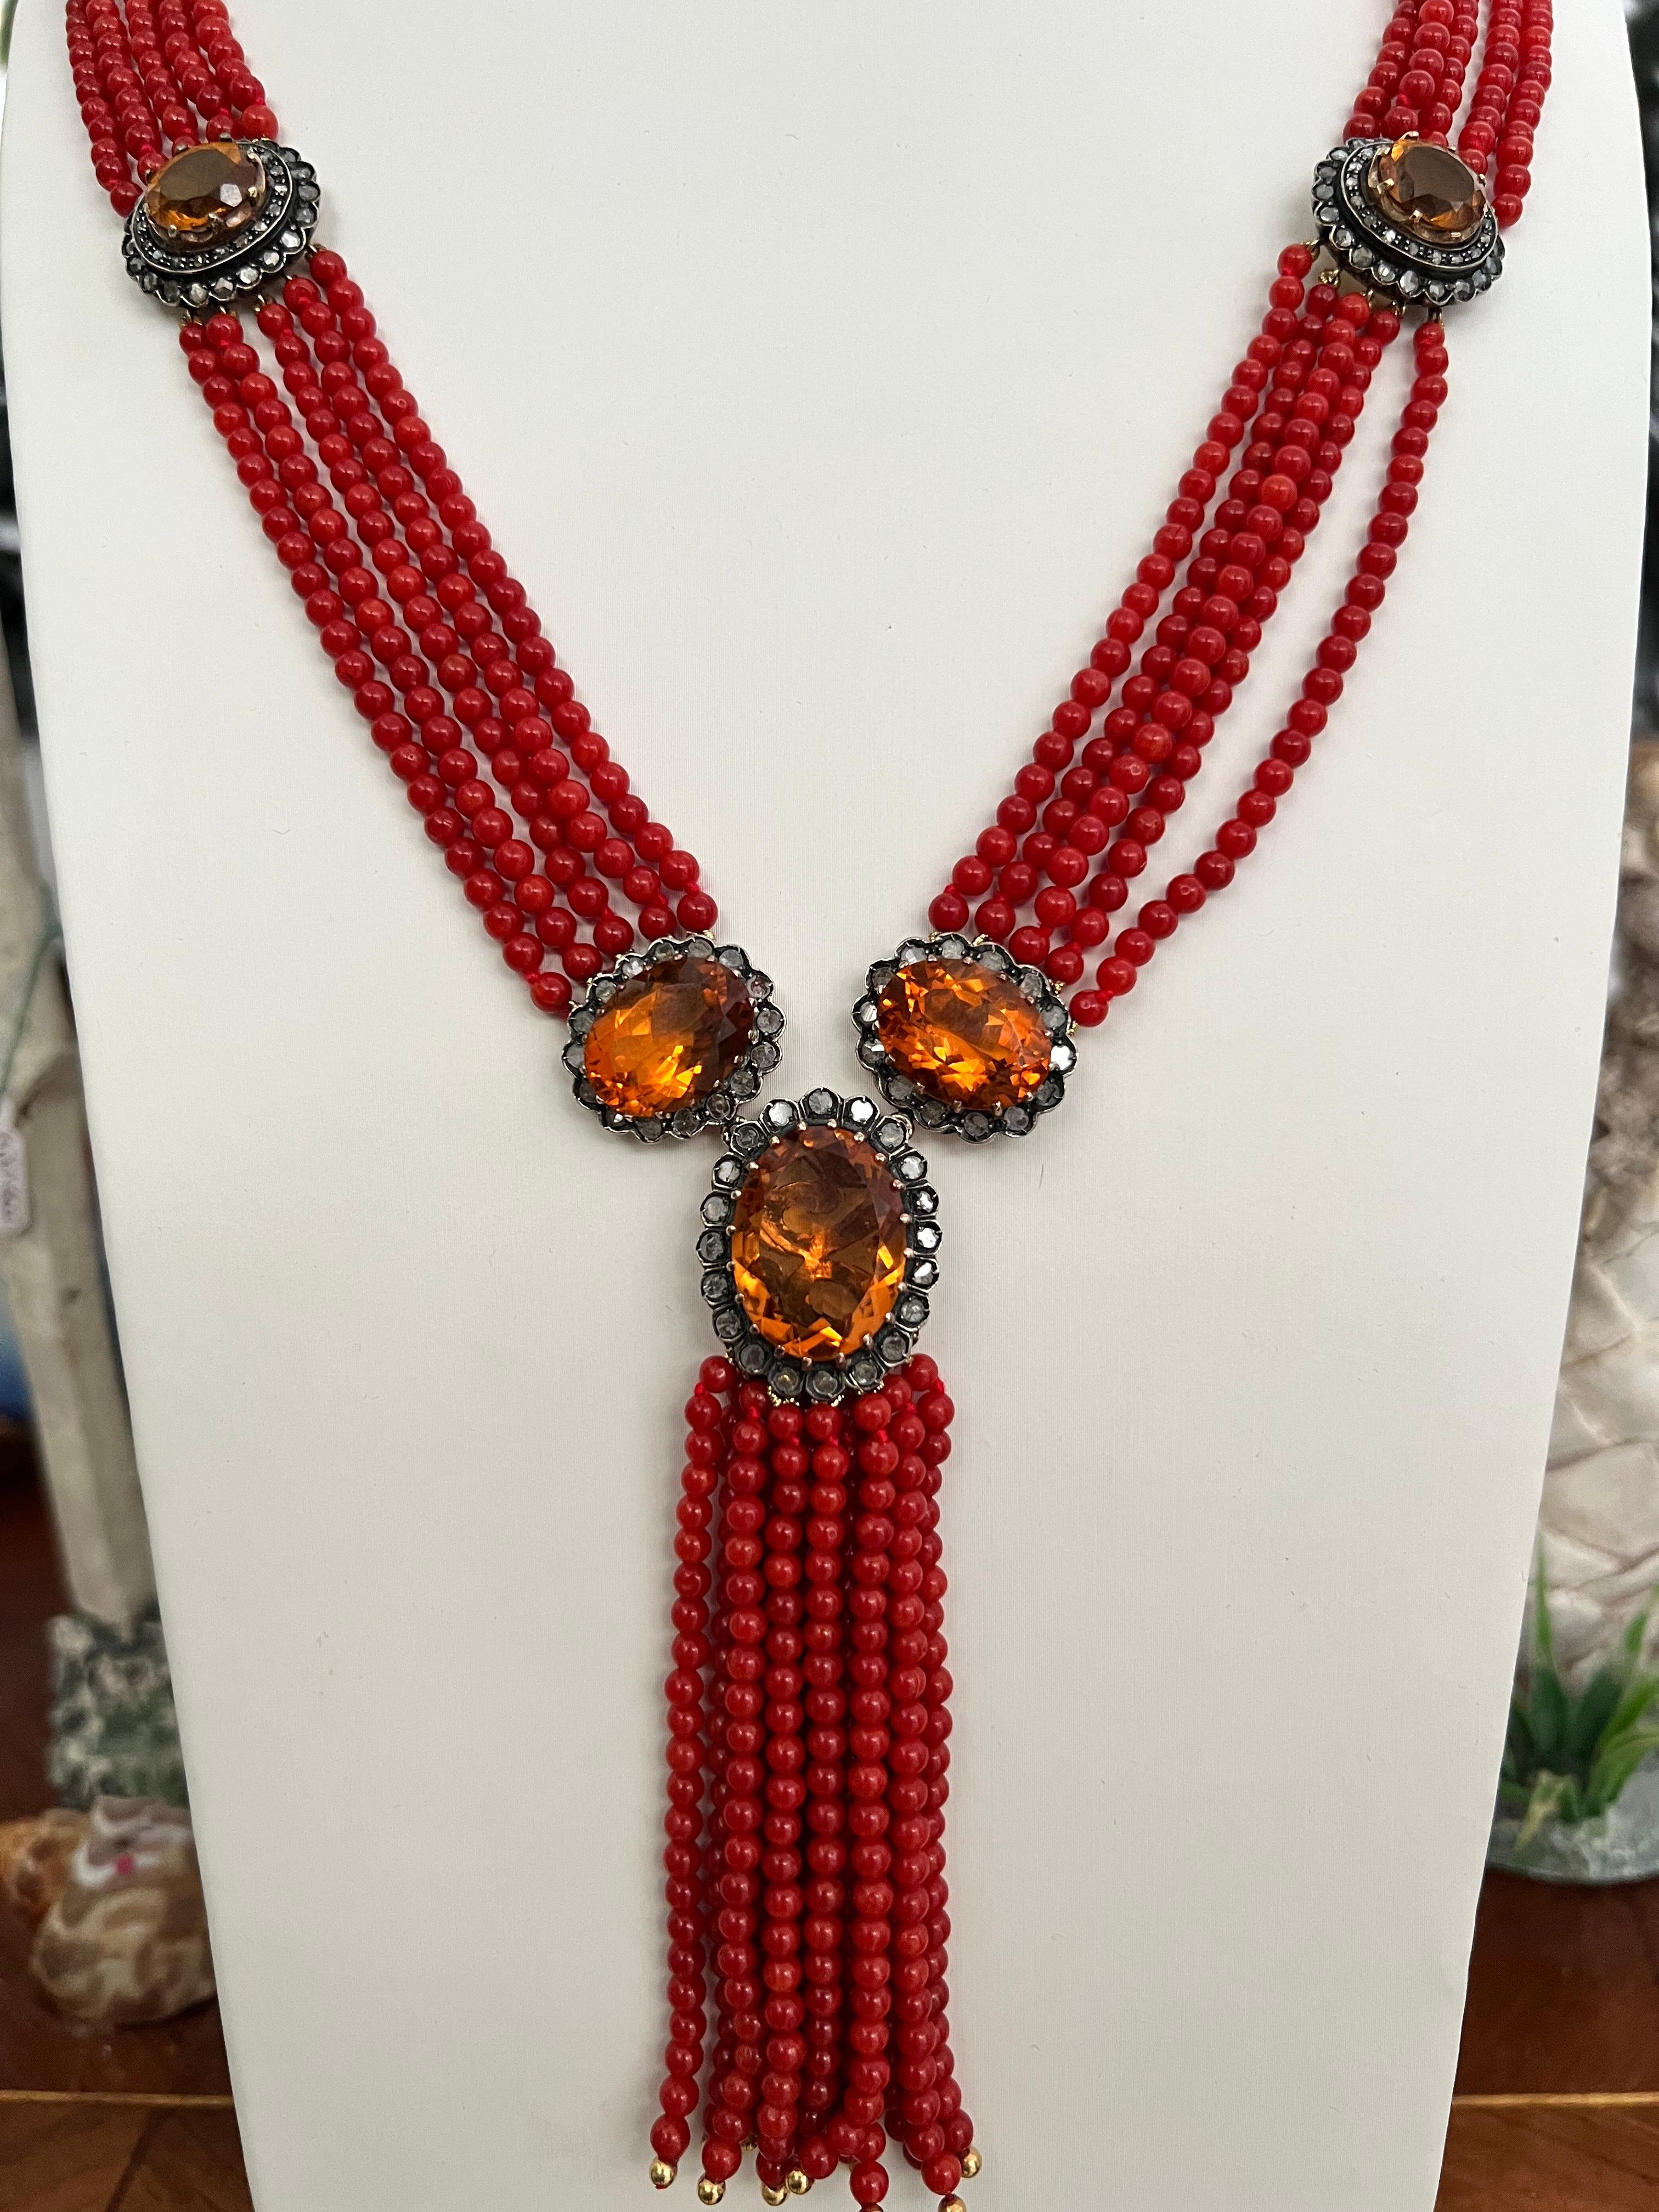 Beautiful natural coral necklace with 10 strands of coral and 5 citrines surronded with old cut diamonds.
The necklace is made in gold 14 karat and 800 thousandths silver.

Necklace total weight 97.20 grams
Diamonds weight 0.98 karat
Coral weight